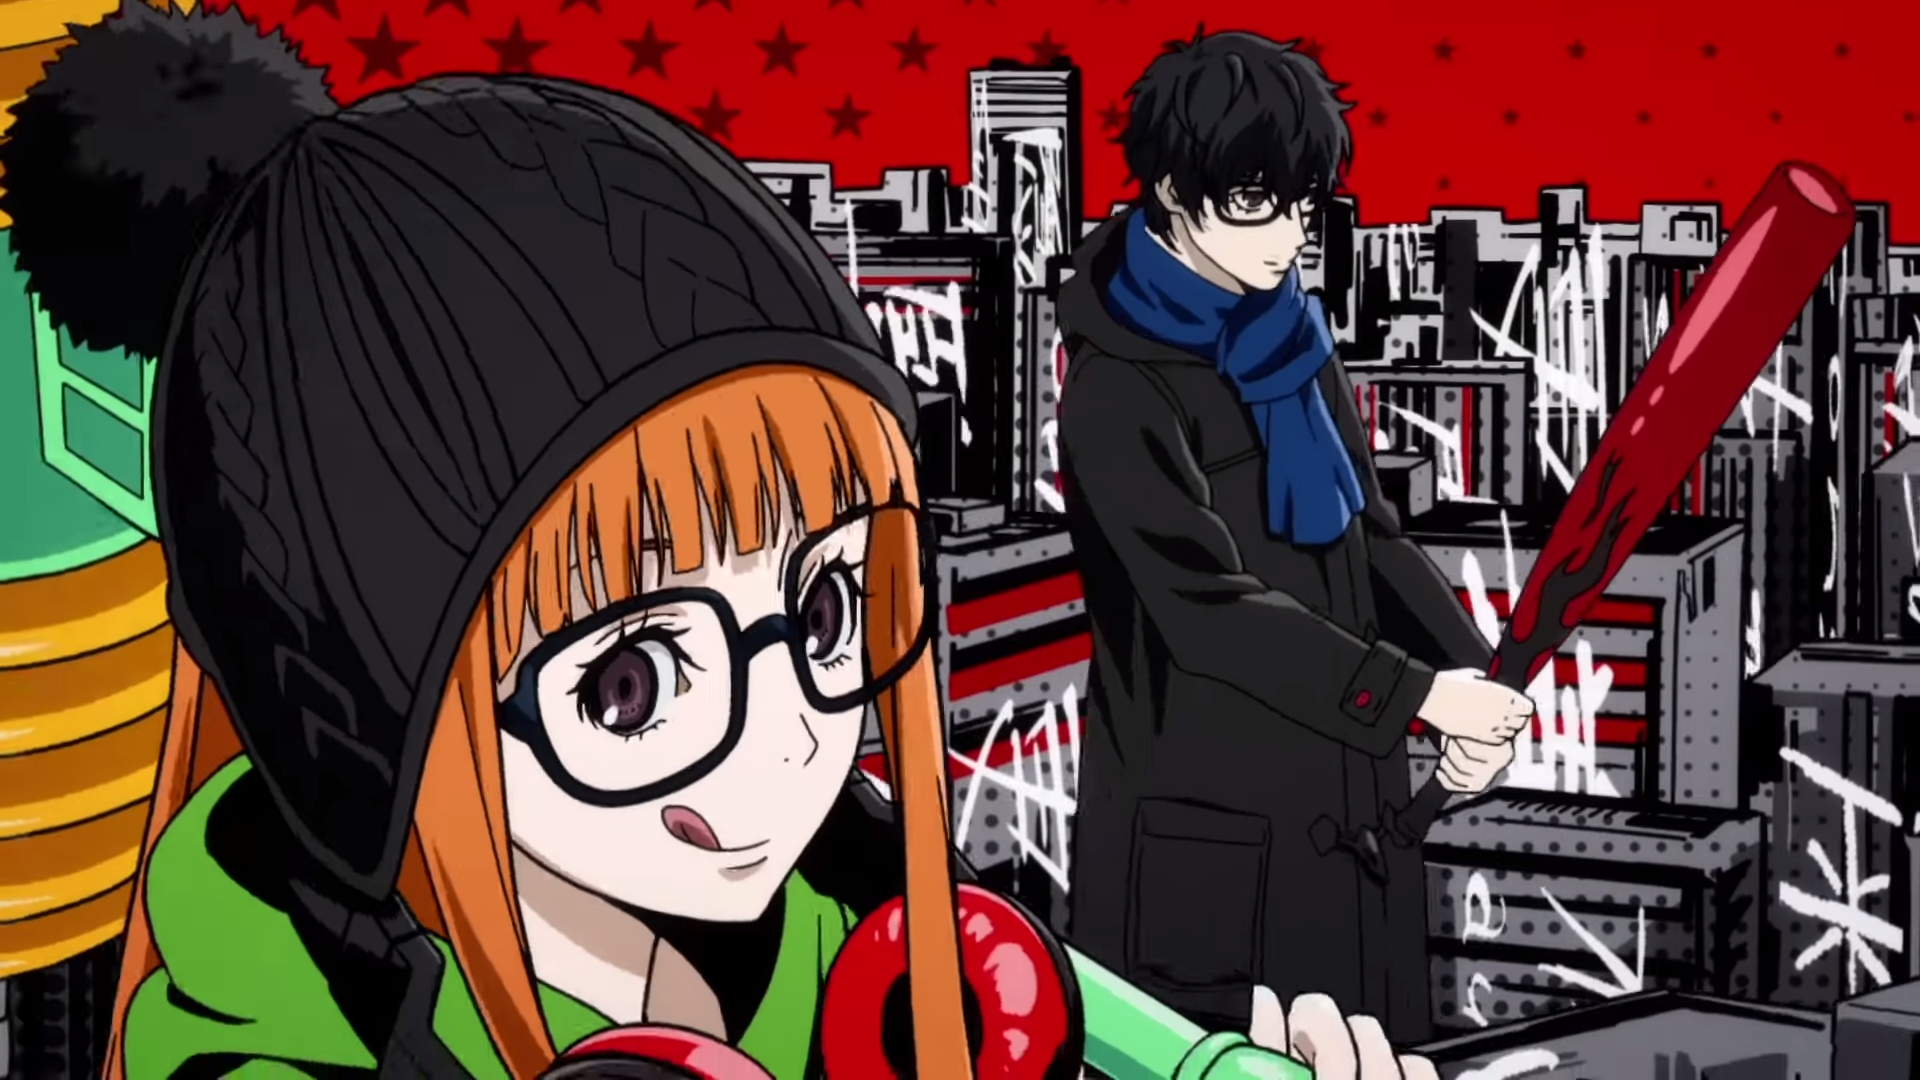 Watch 'Persona 5 the Animation's Opening Theme Here